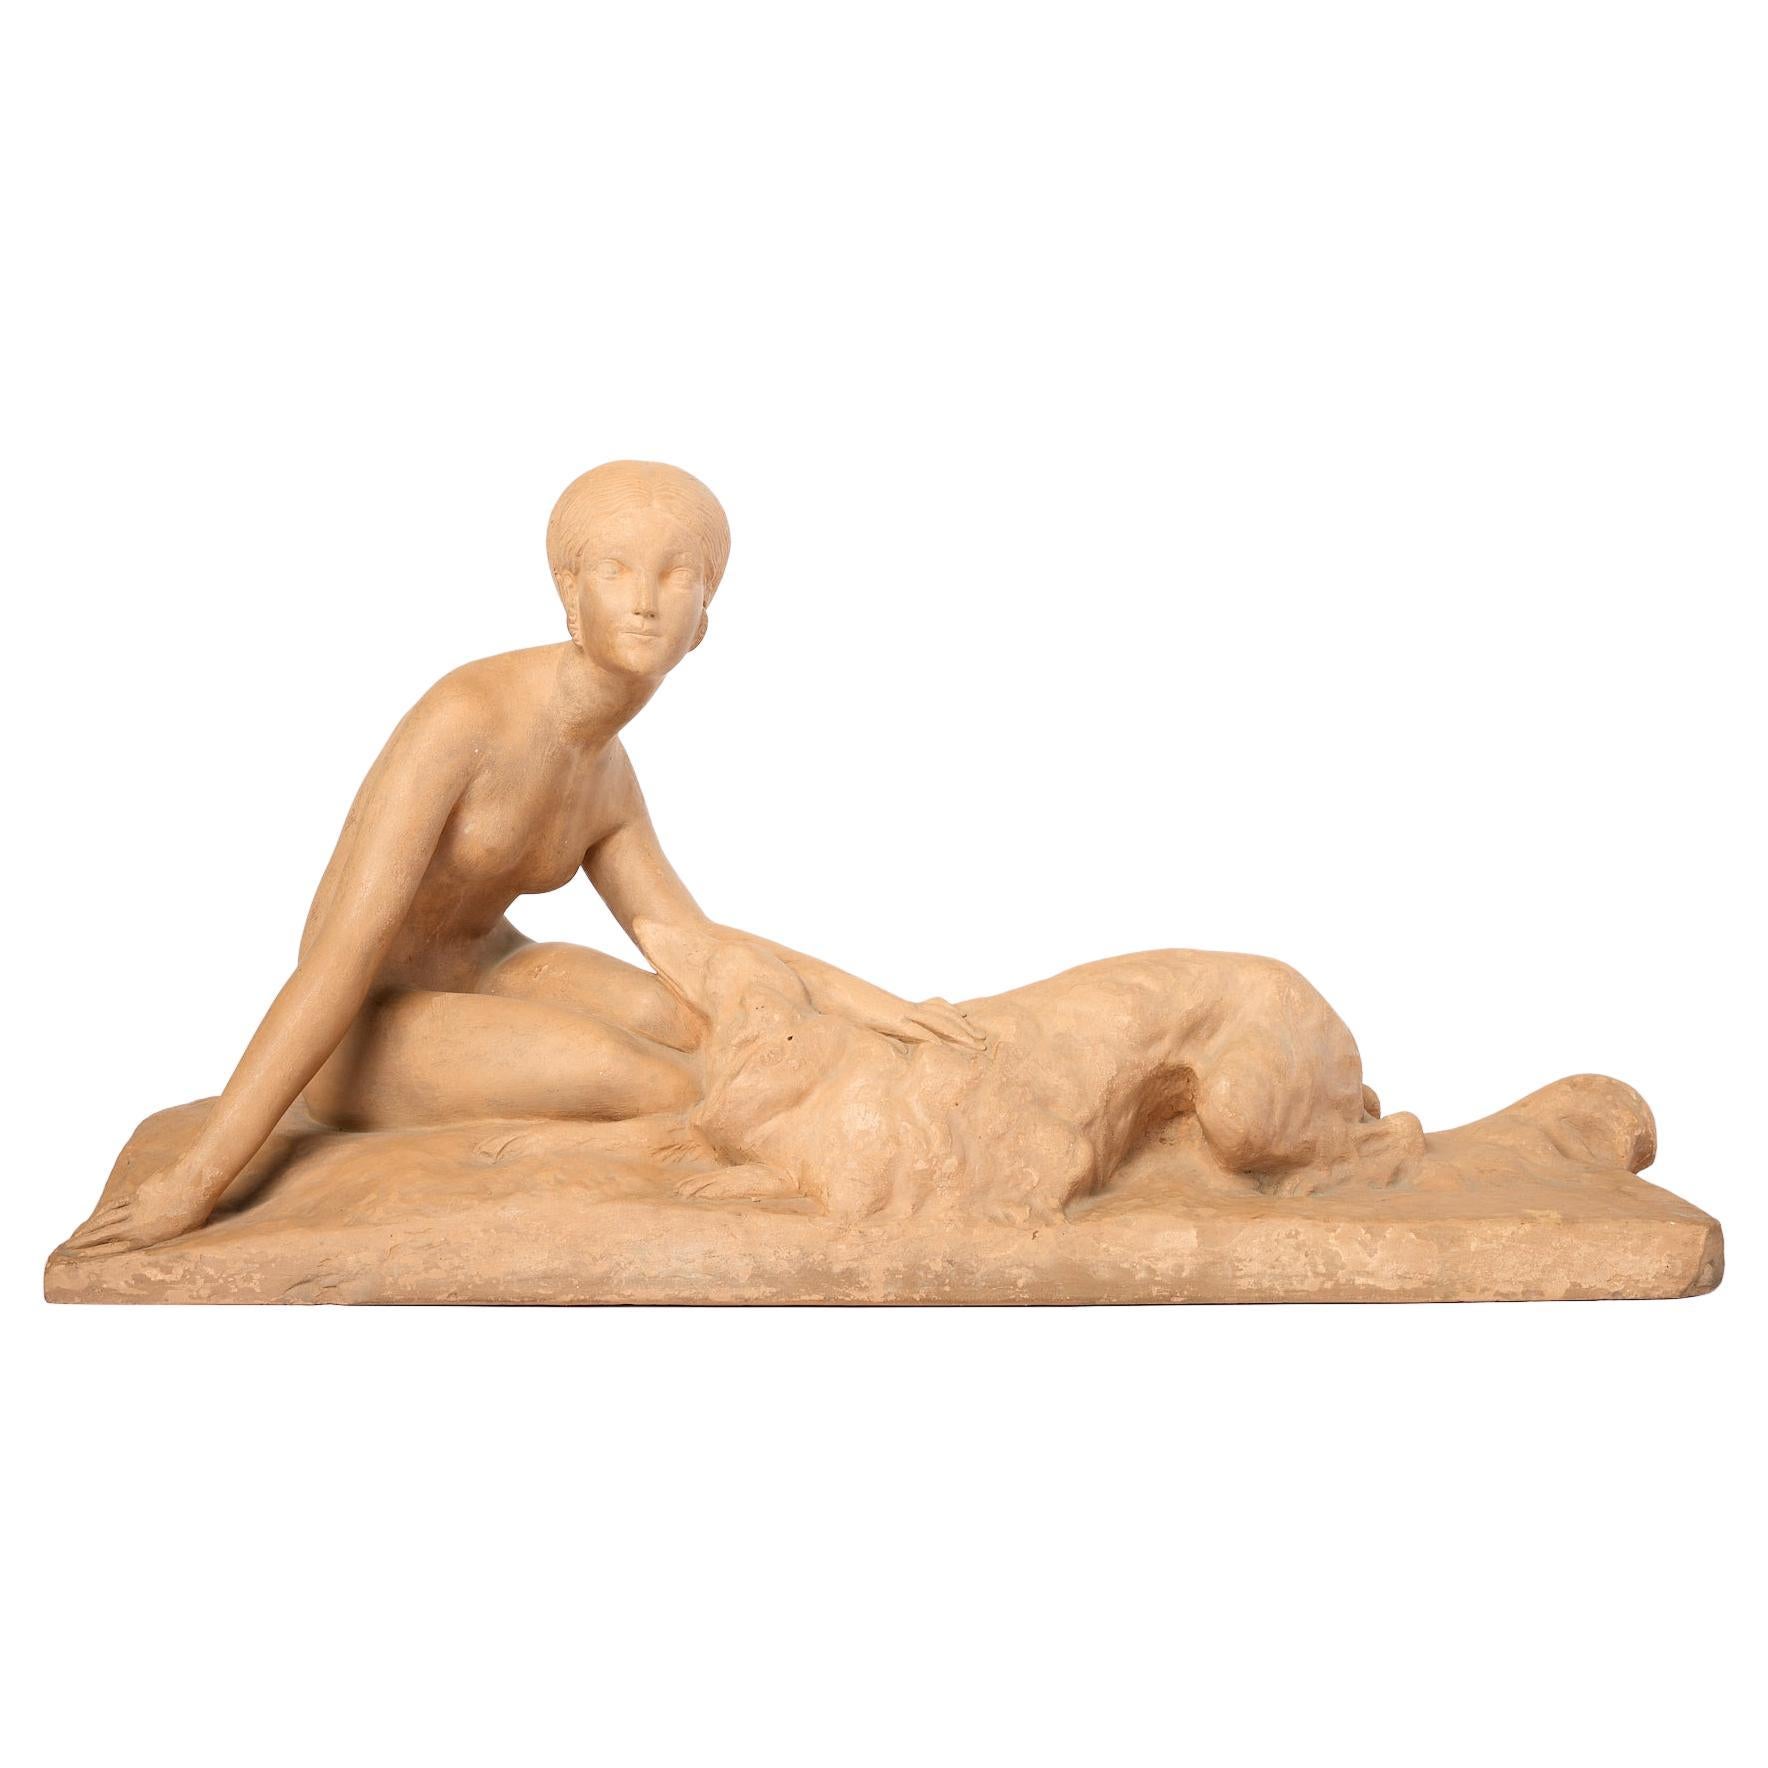  French Art Deco Terracotta Sculpture of A Woman with a Dog,  by George Costes